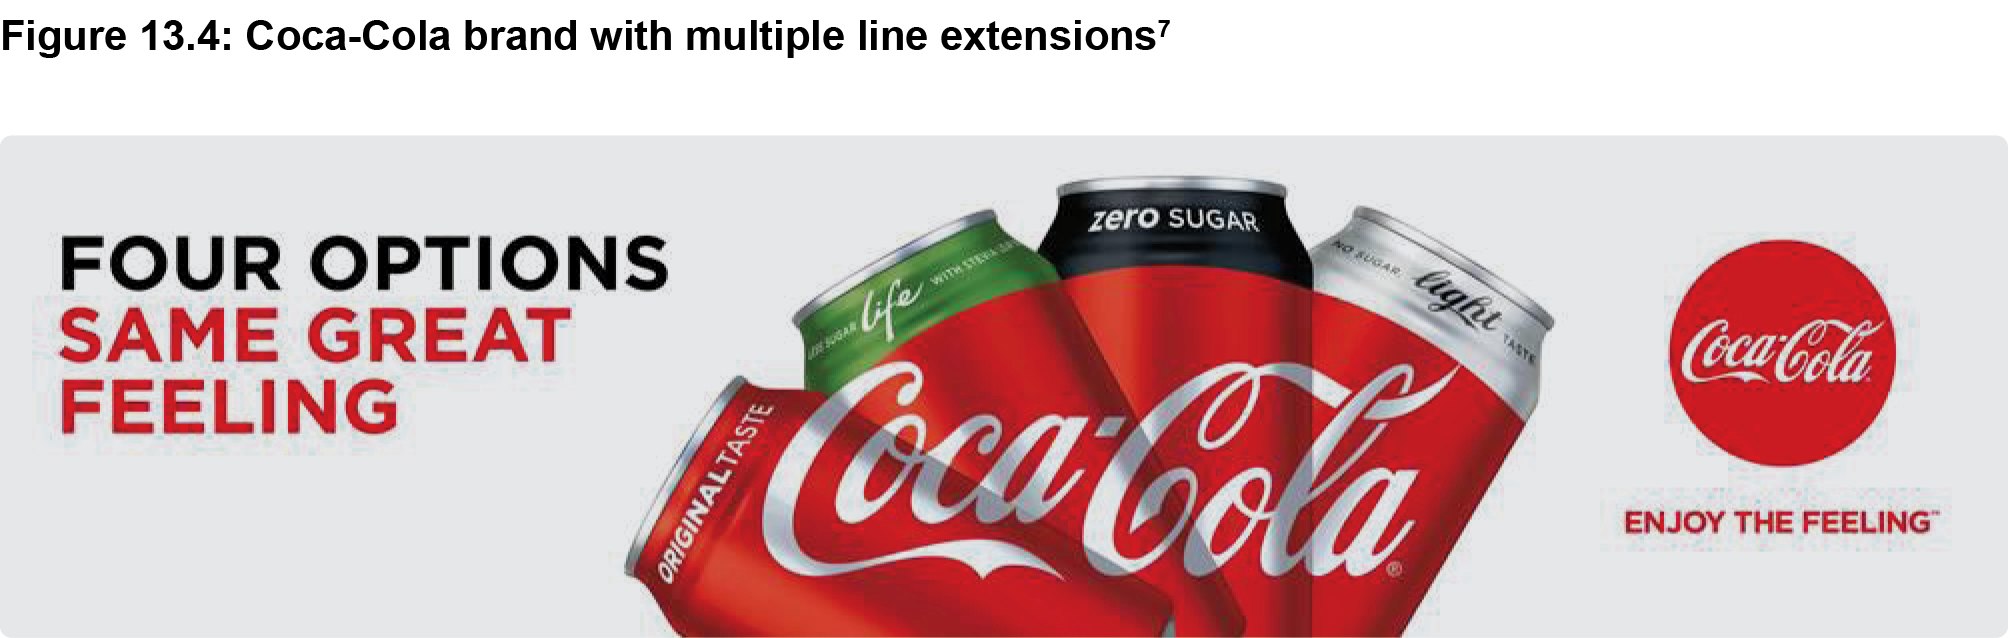 Figure 13.4: Coca-Cola brand with line extensions